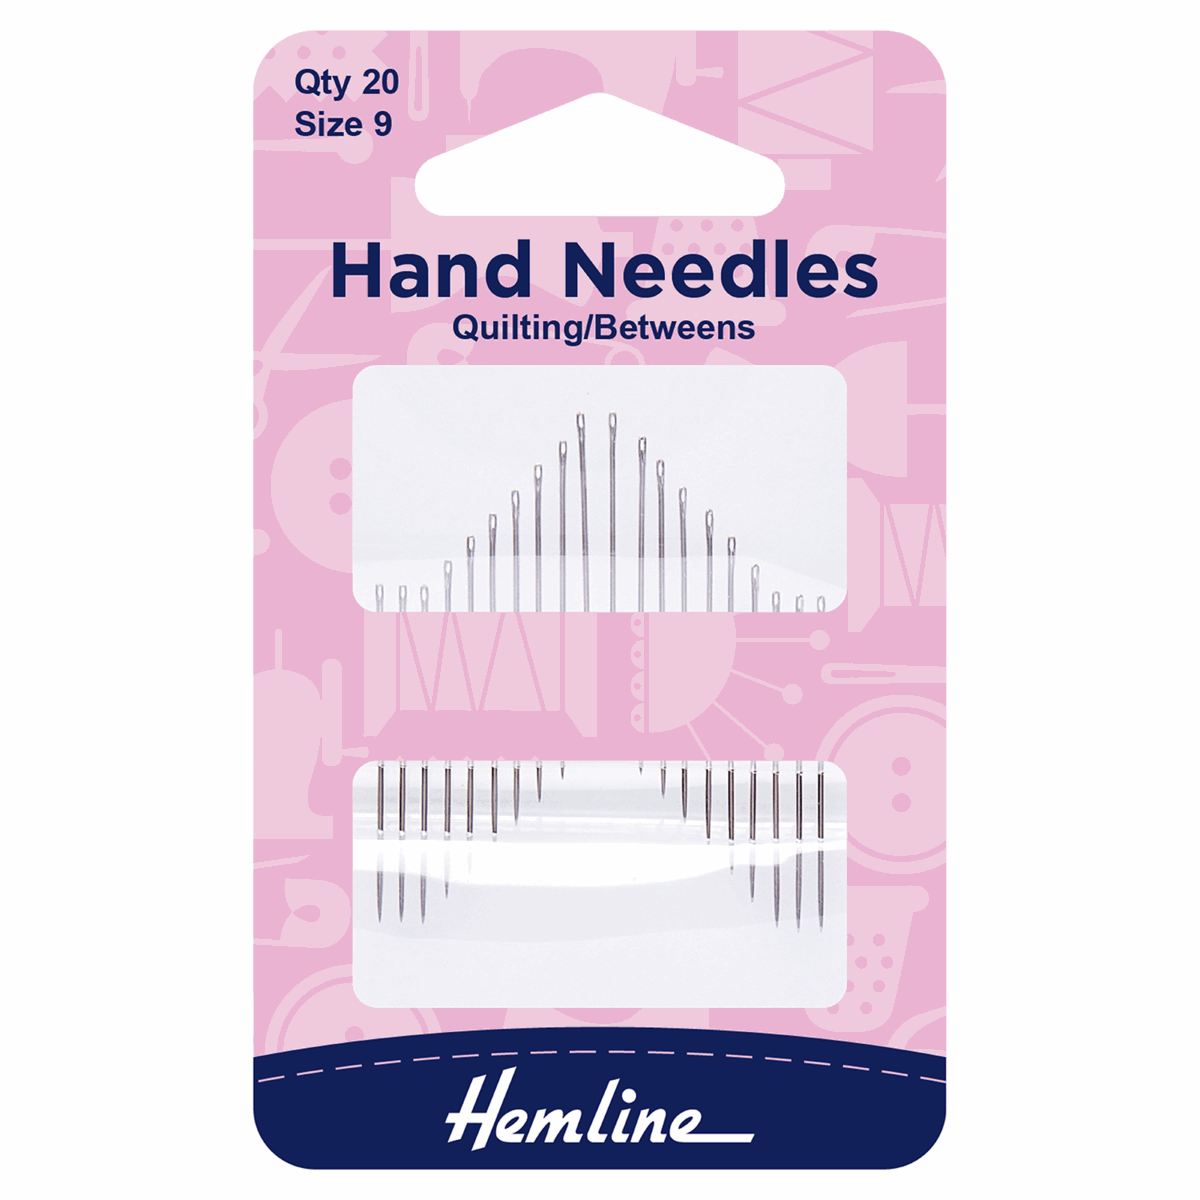 Hemline Between/Quilting Hand Sewing Needles - Size 9 (Pack of 20)